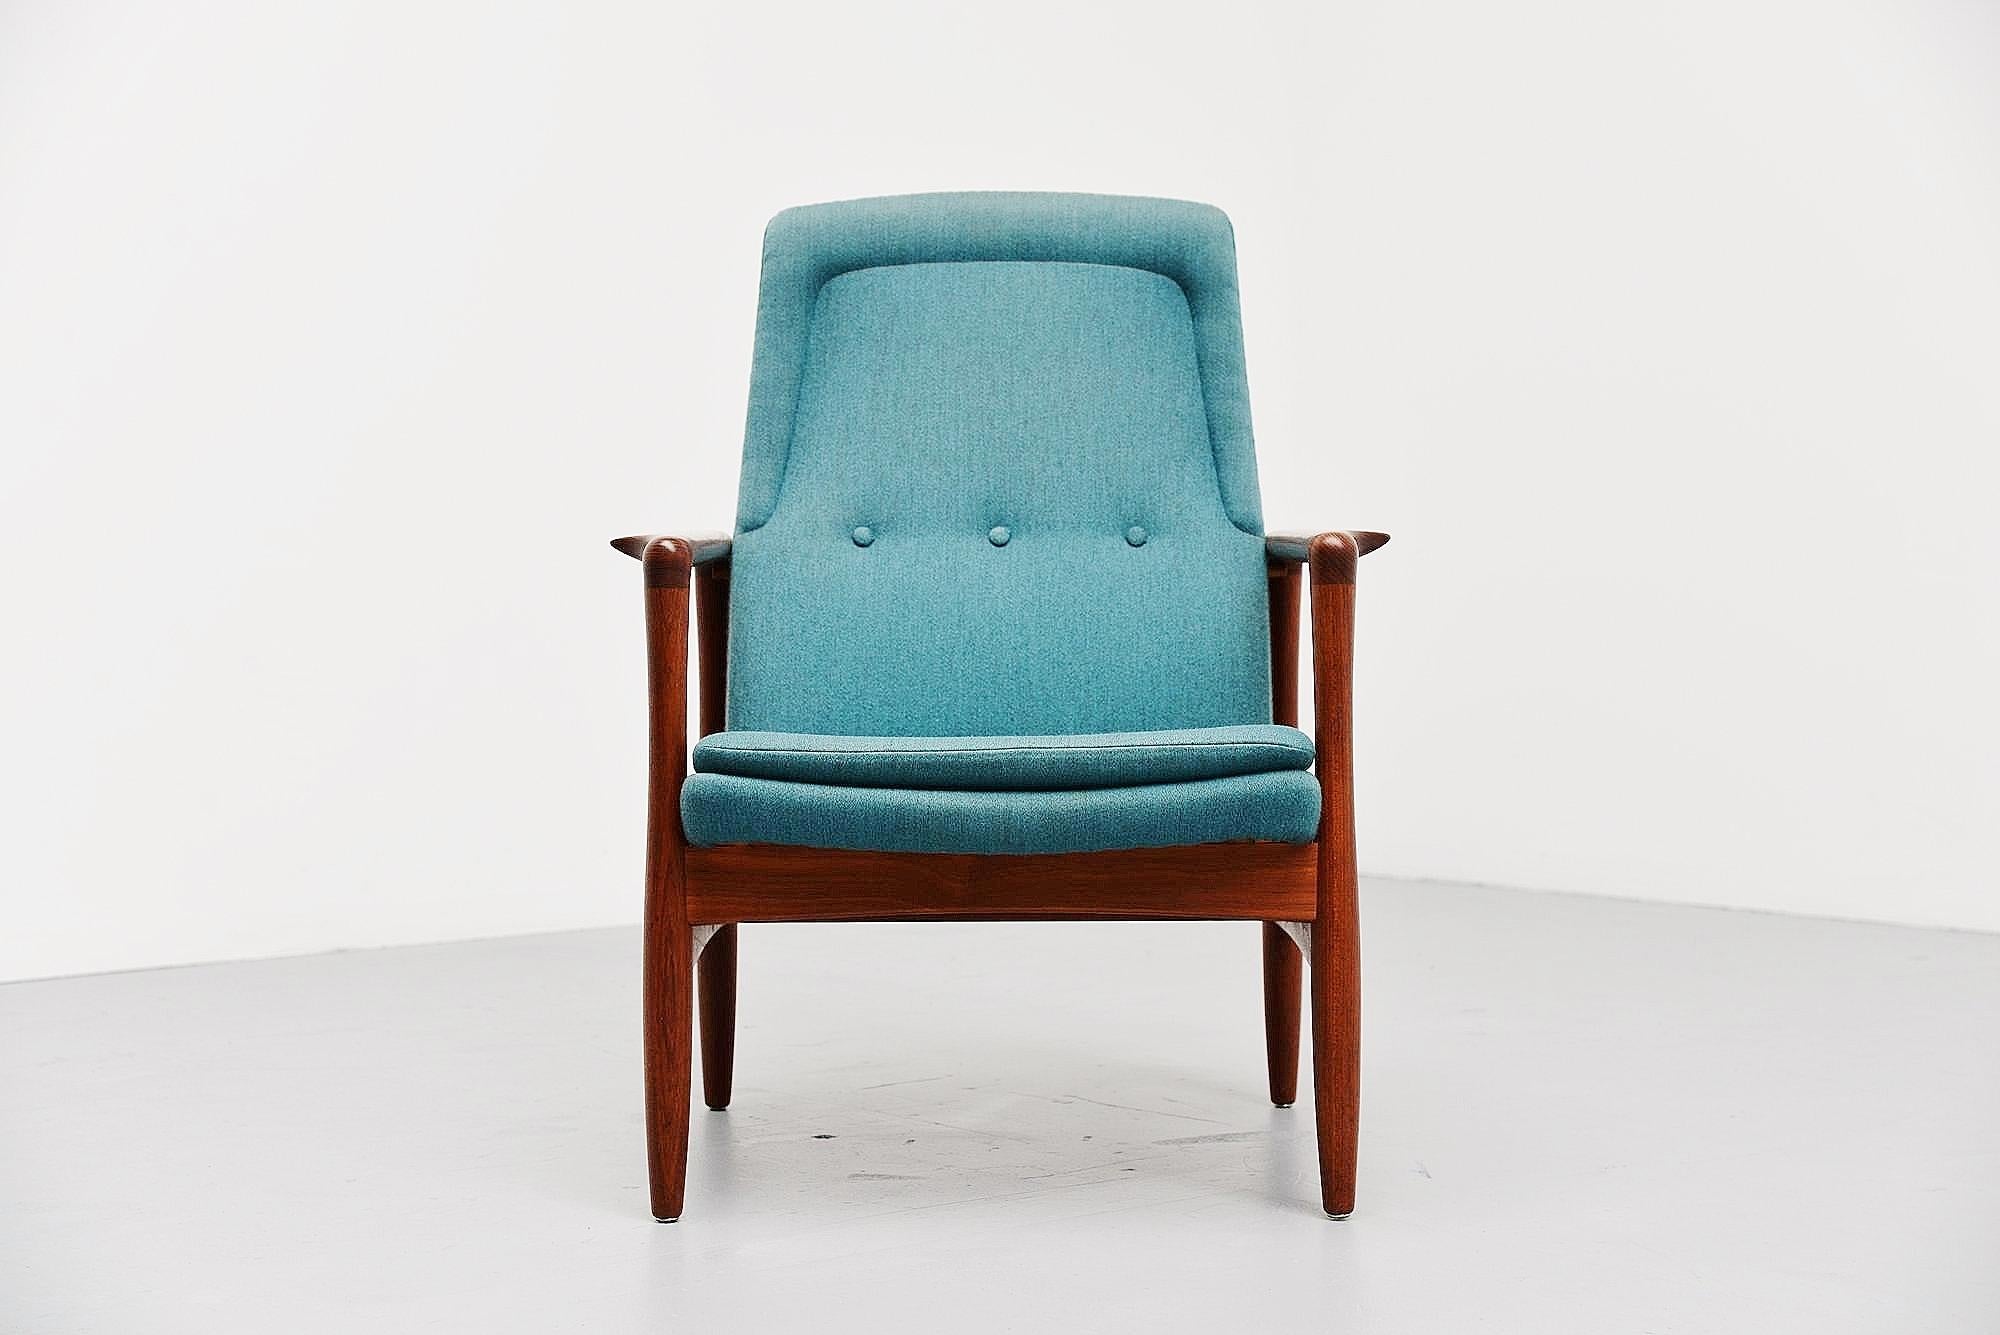 Rare easy chair designed by Torbjørn Afdal for vein Bjørneng / Bruksbo, Denmark 1957 - 1958. This chair has a solid teak wooden frame and original blue upholstery which was still in perfect condition. We just renewed the foam of the seating cushion